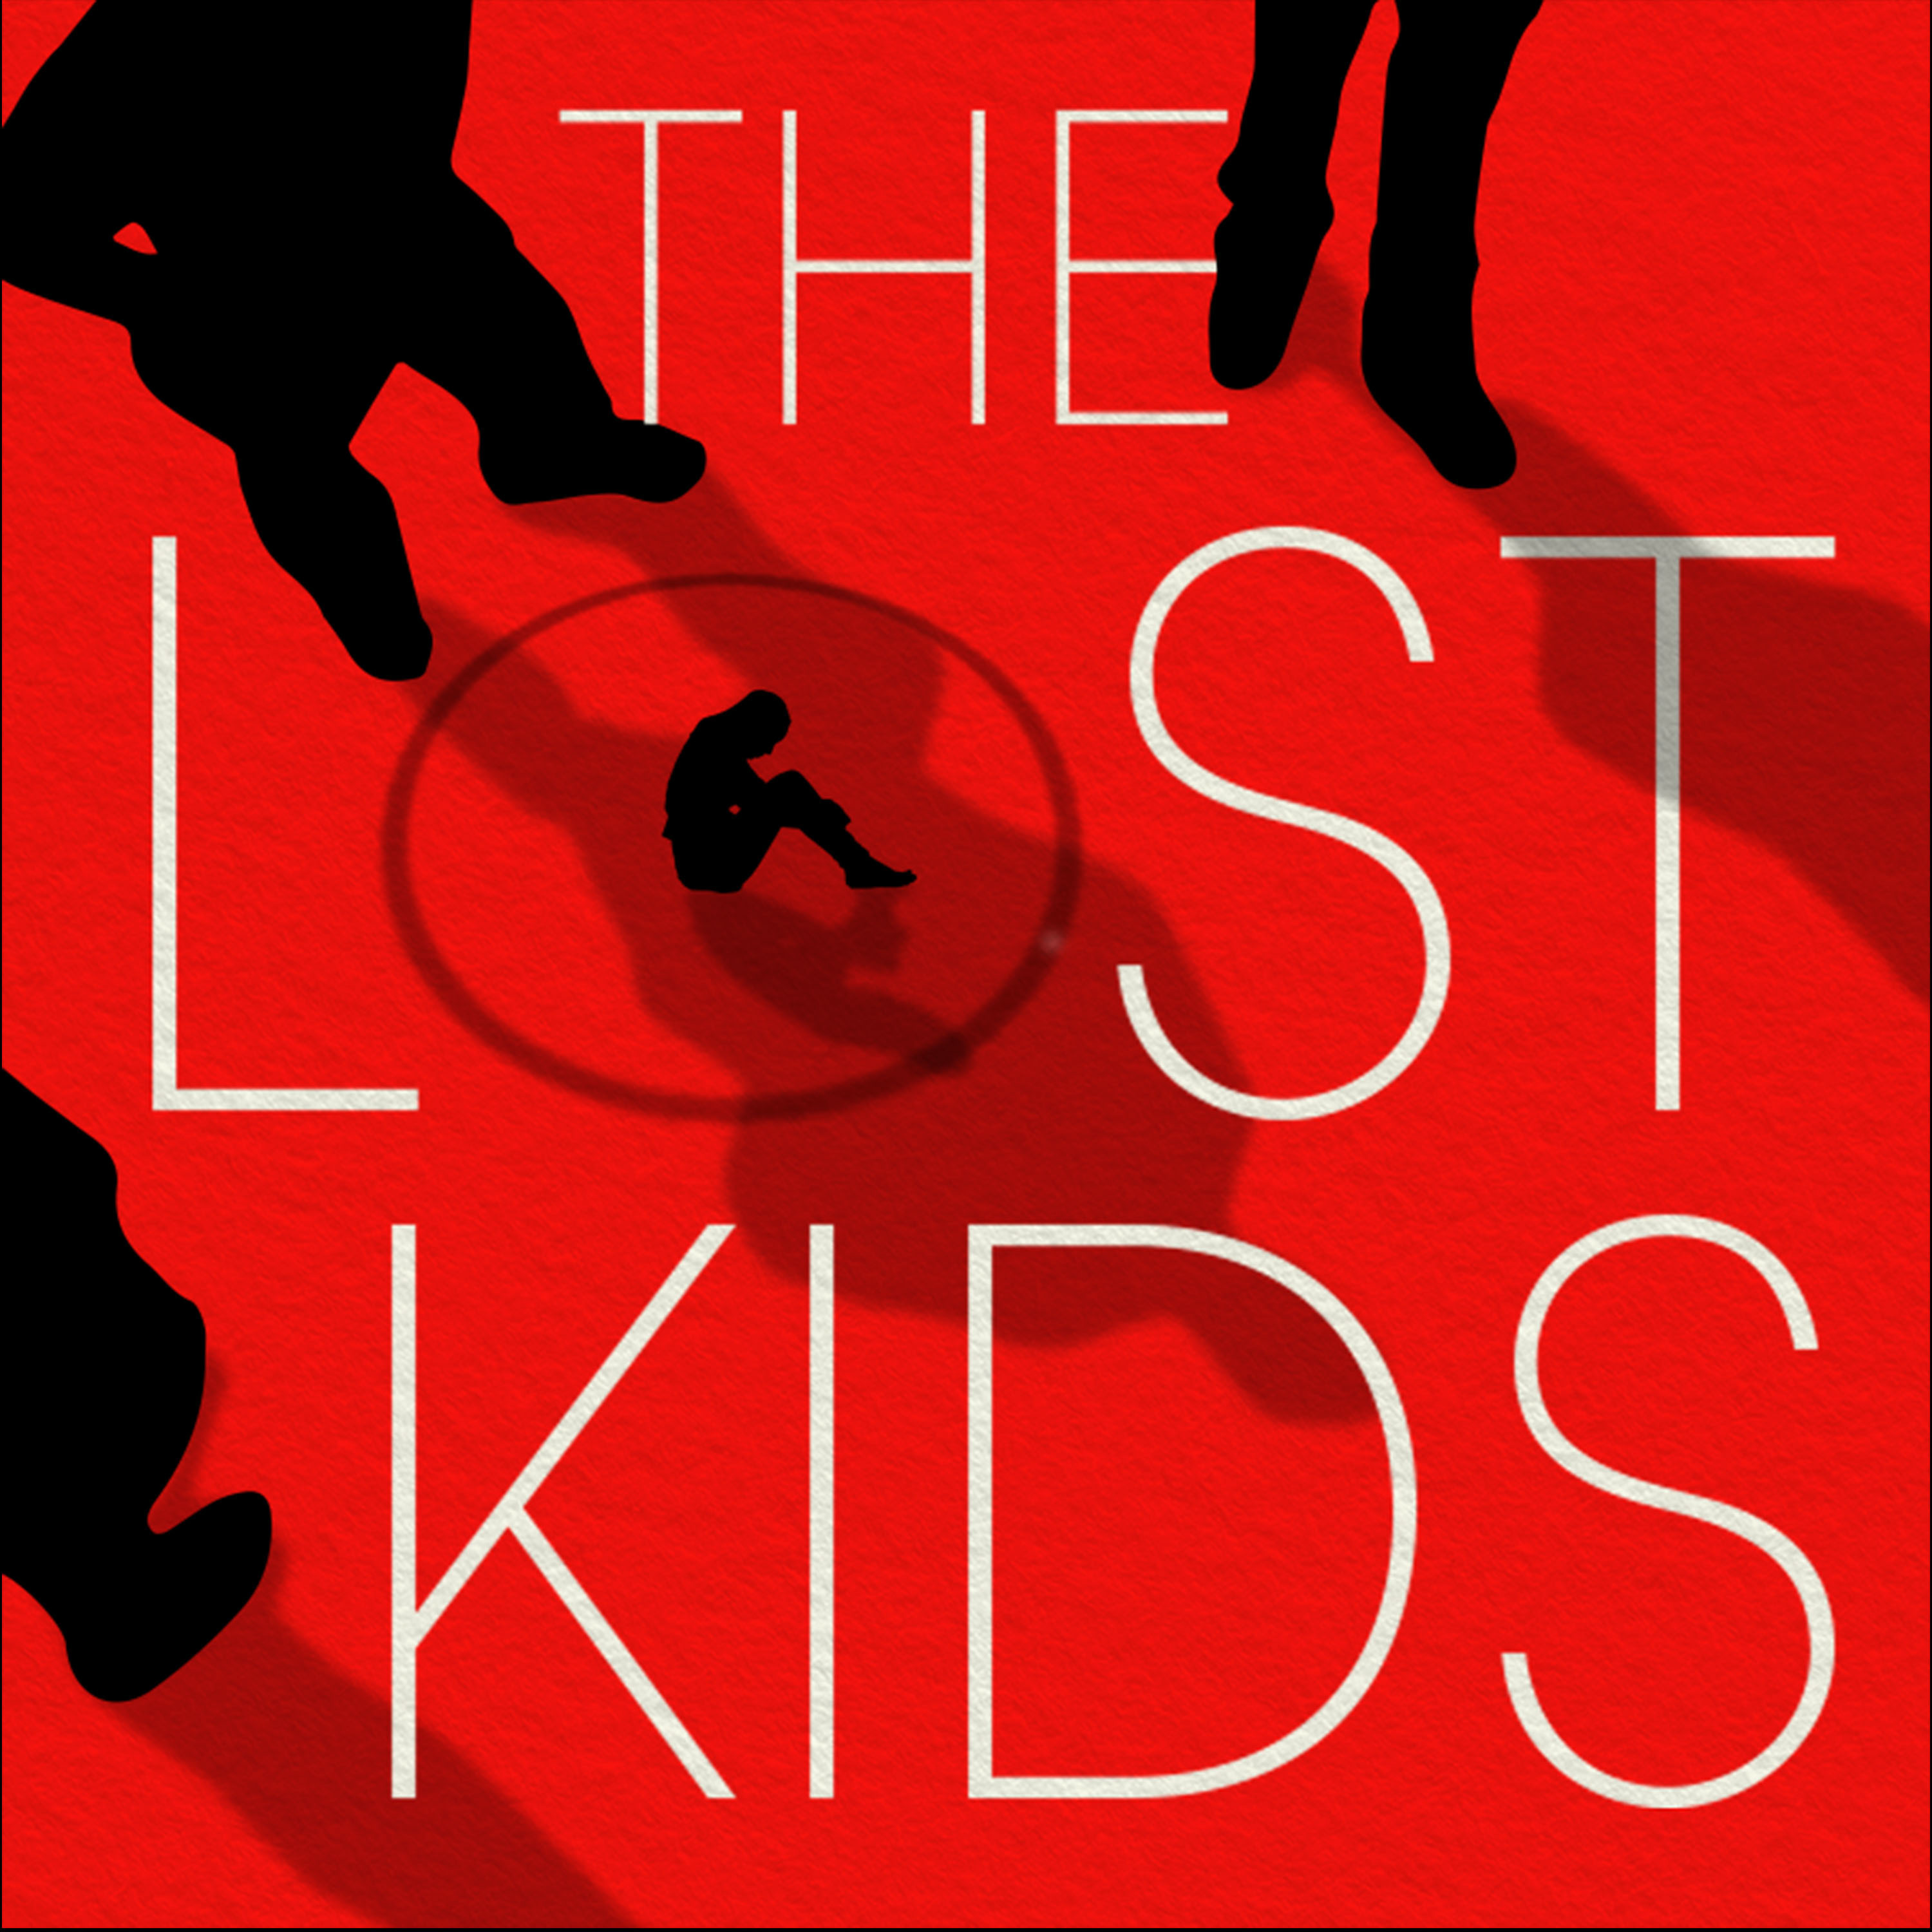 The Lost Kids